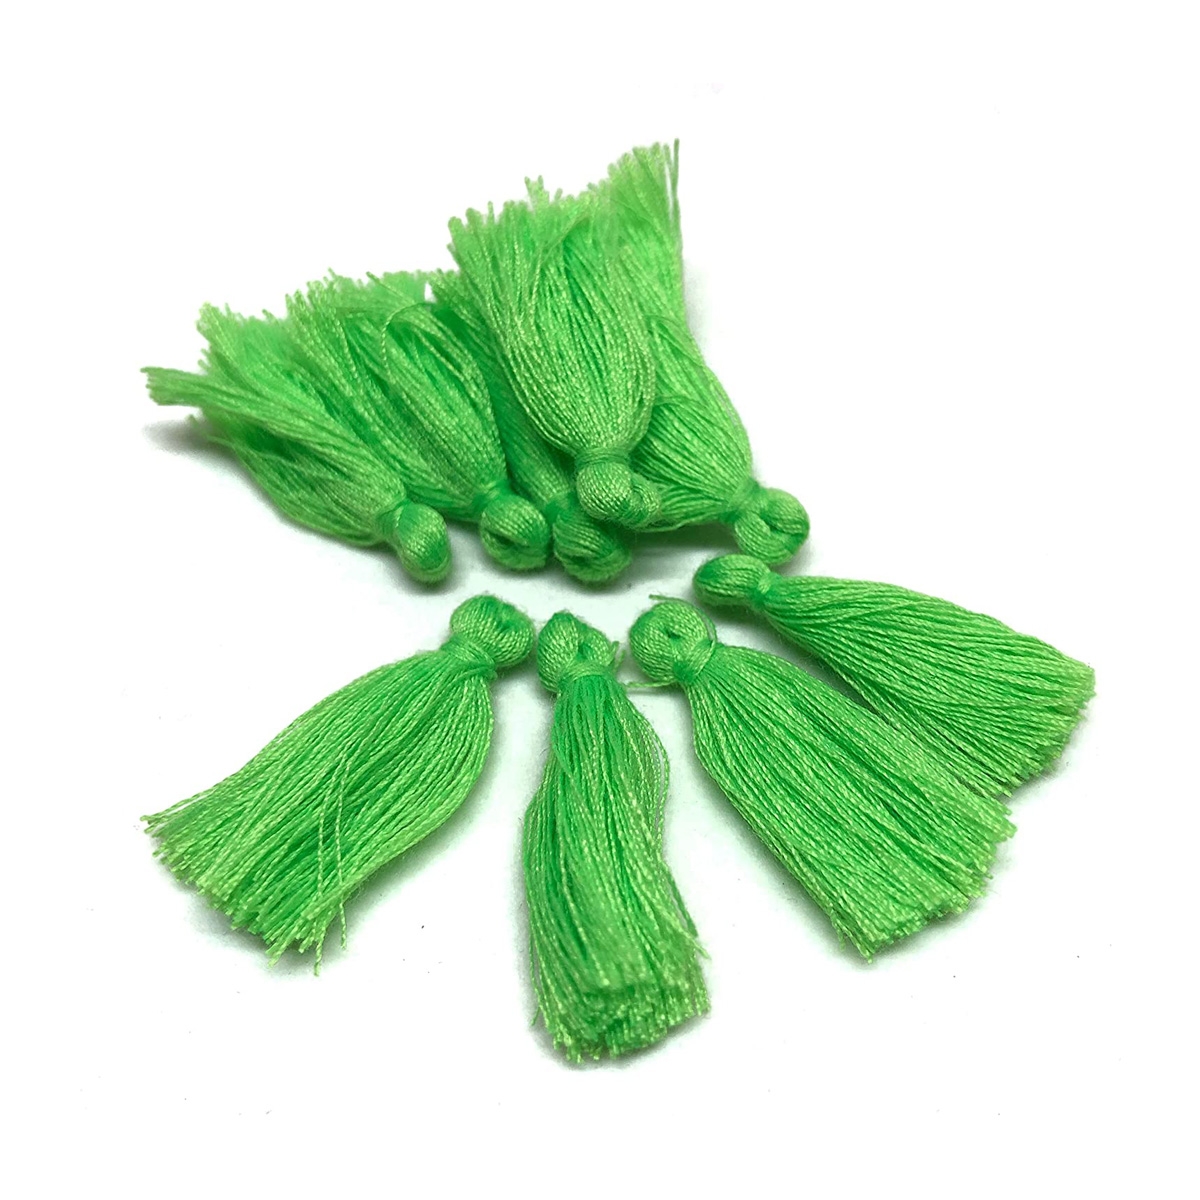 Handmade Mini DIY Tassels 27mm in Long with 0.5mm Loops for Jewelry and Craft Making (Green) 